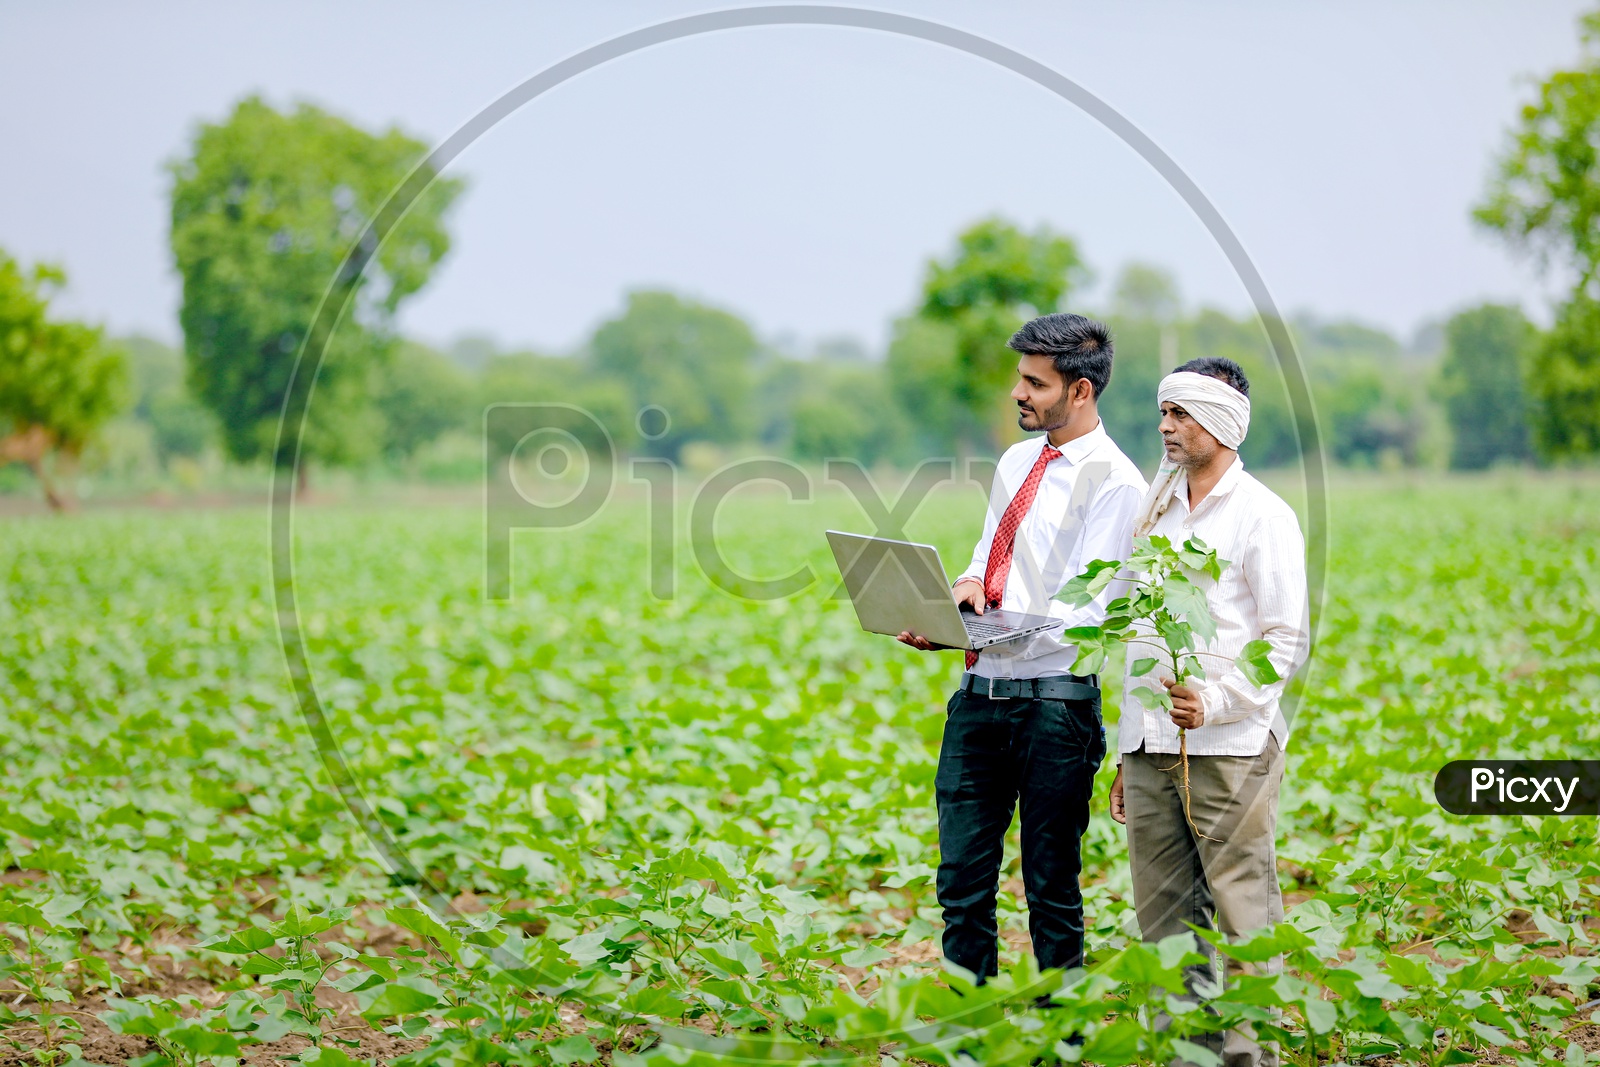 Indian Young Professional With a laptop in Hand in Cotton Field Along With Farmer